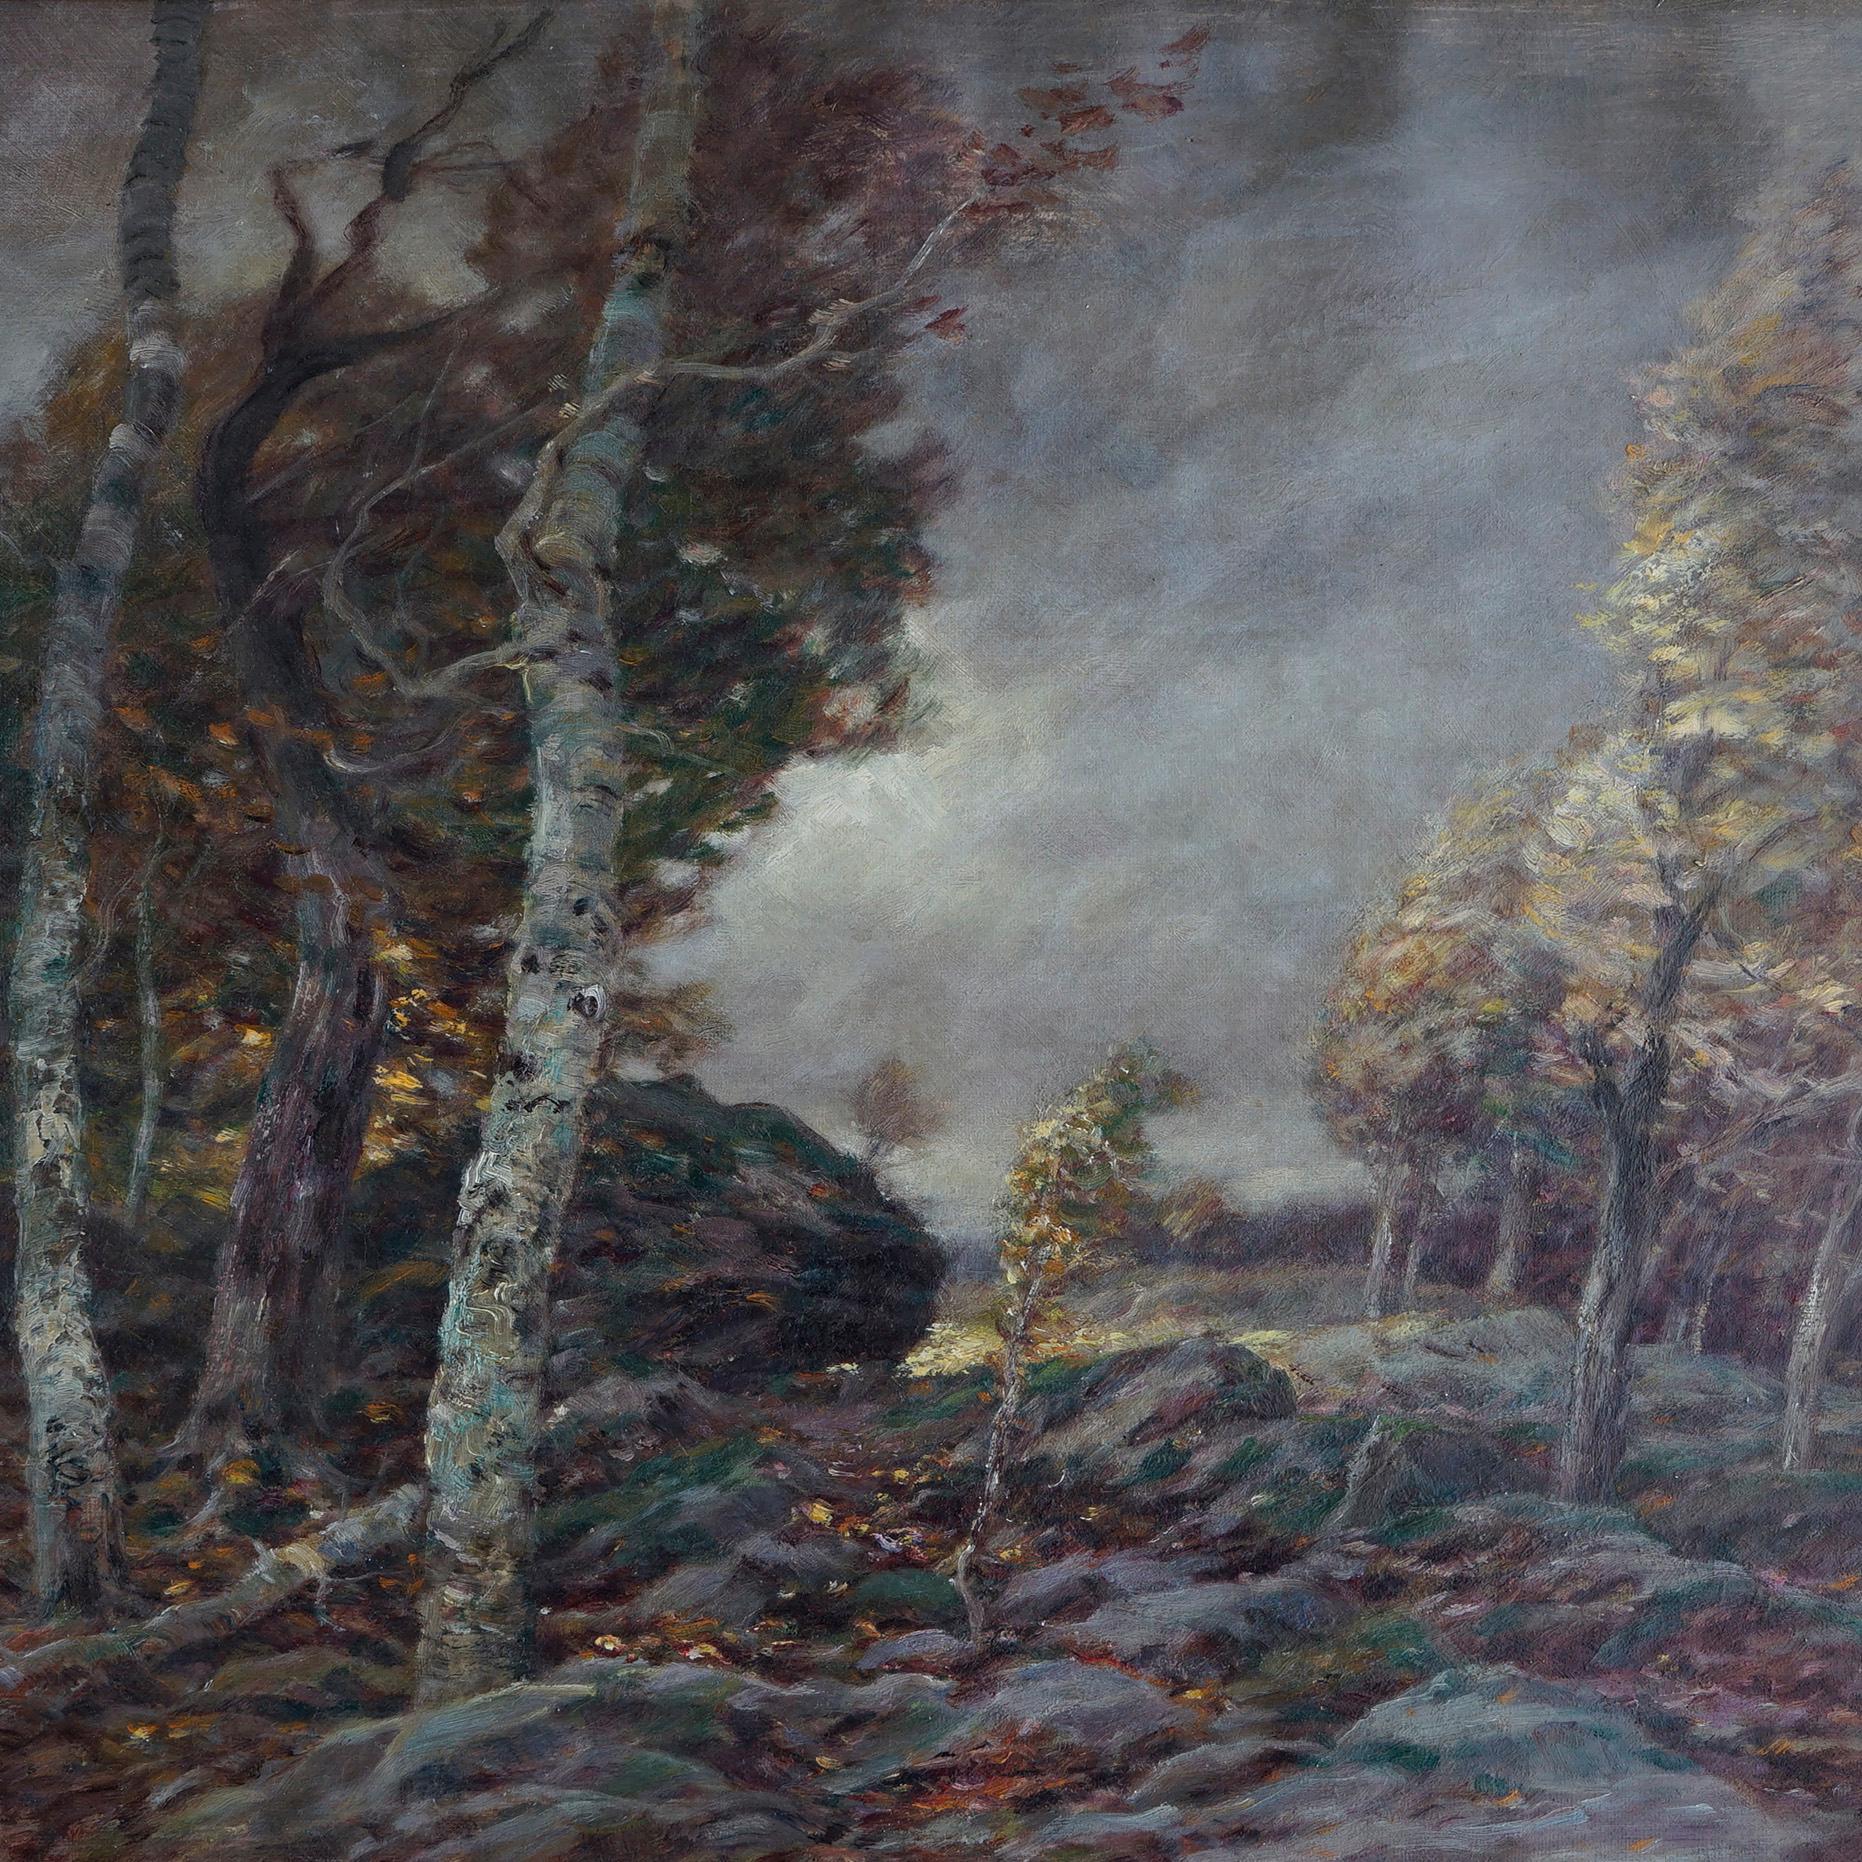 An antique landscape painting by John Semon offers oil on canvas forest interior scene, artist signed as photographed, seated in giltwood frame, c1900

Measures- 28''H x 22.25''W x 2''D

Historical Note:
SEMON, JOHN (22 Feb. 1852-14 Dec. 1917)